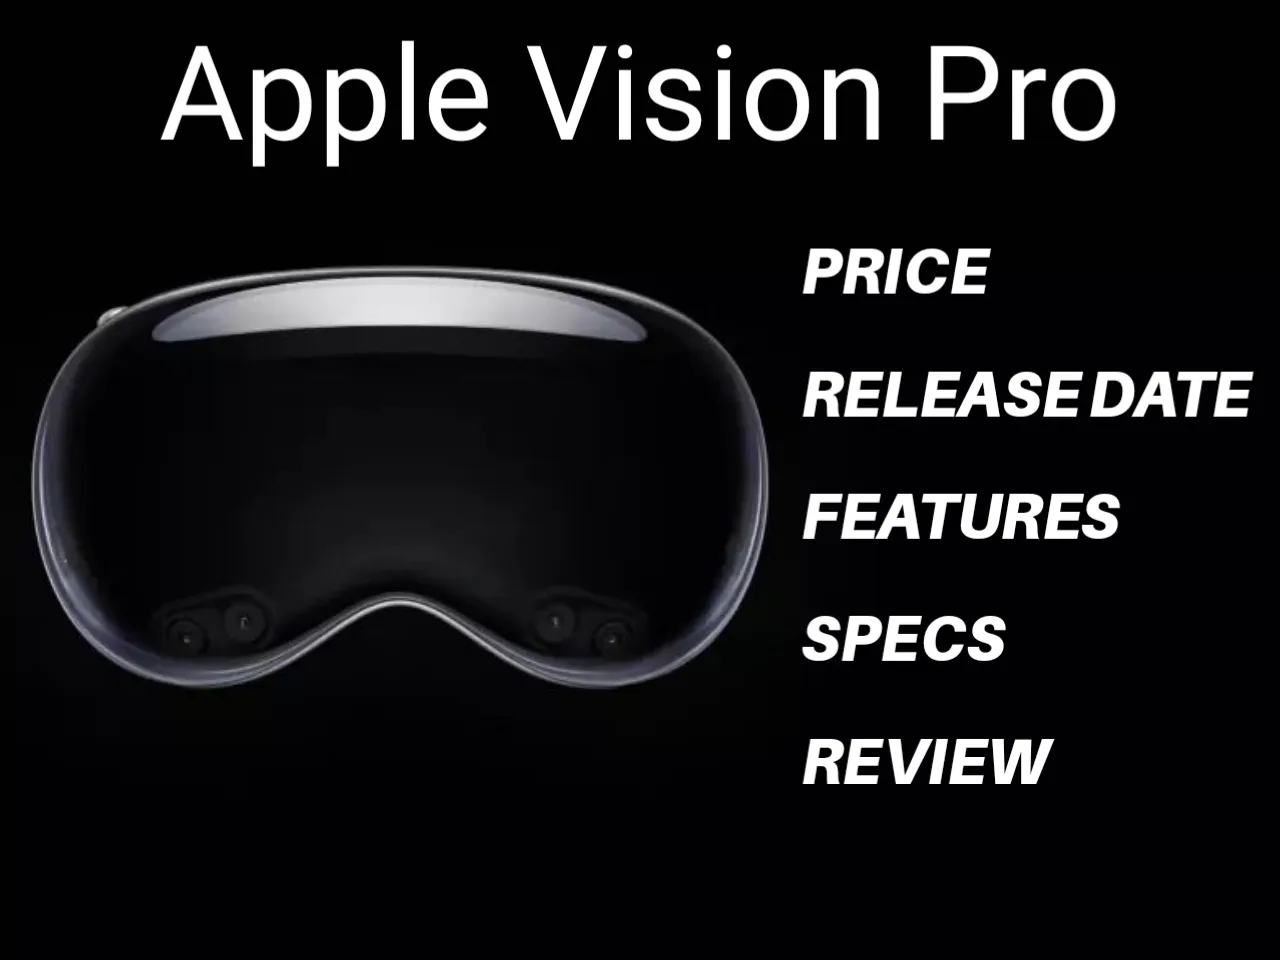 Apple Vision Pro price, release date, specs, features and review